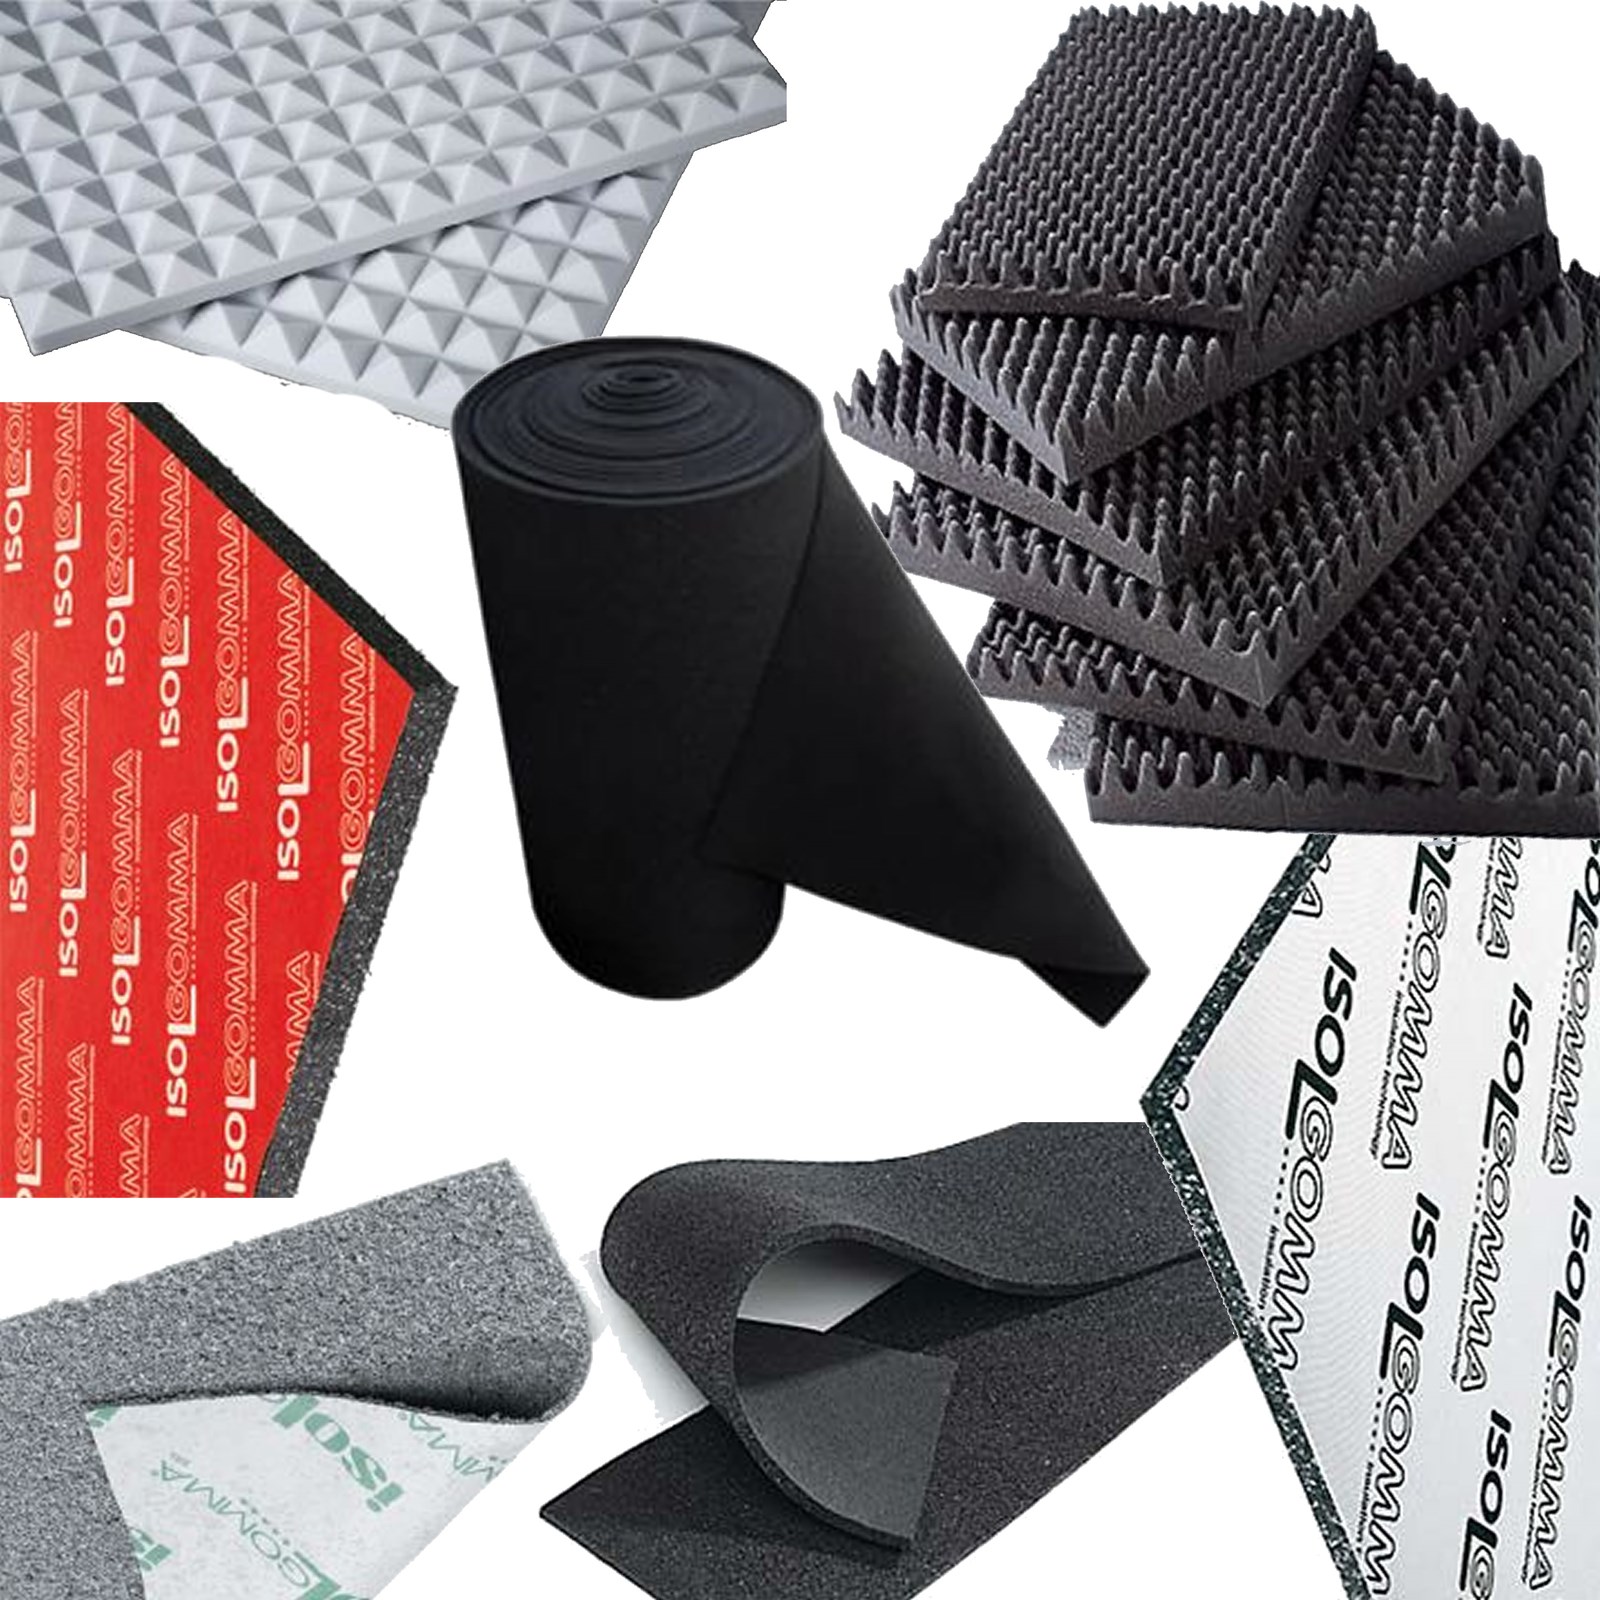 Acoustic / Sound Insulation Materials